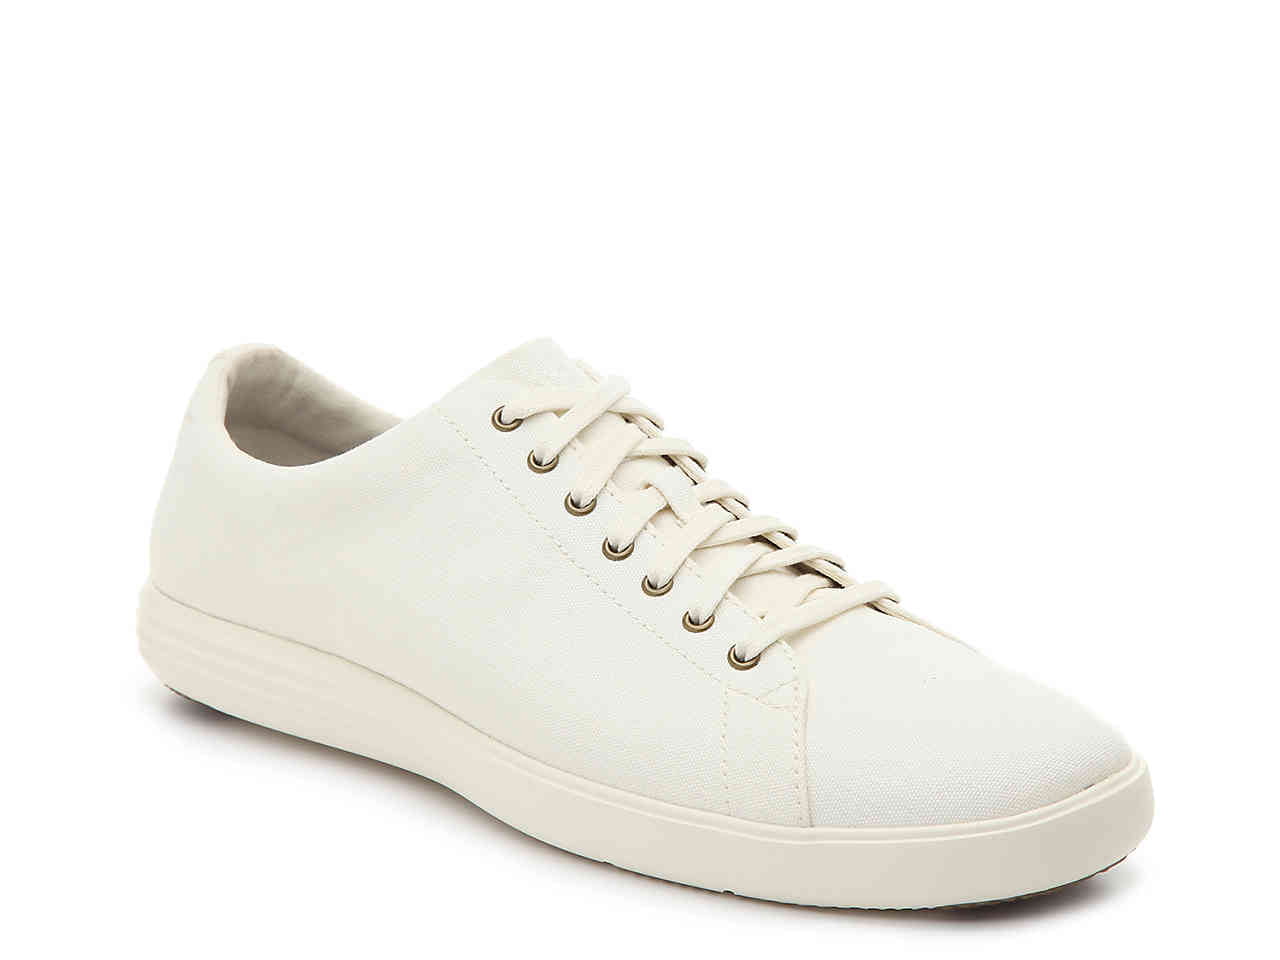 Cole Haan Men's Grand Crosscourt II Fashion Lace-up Sneakers White ...